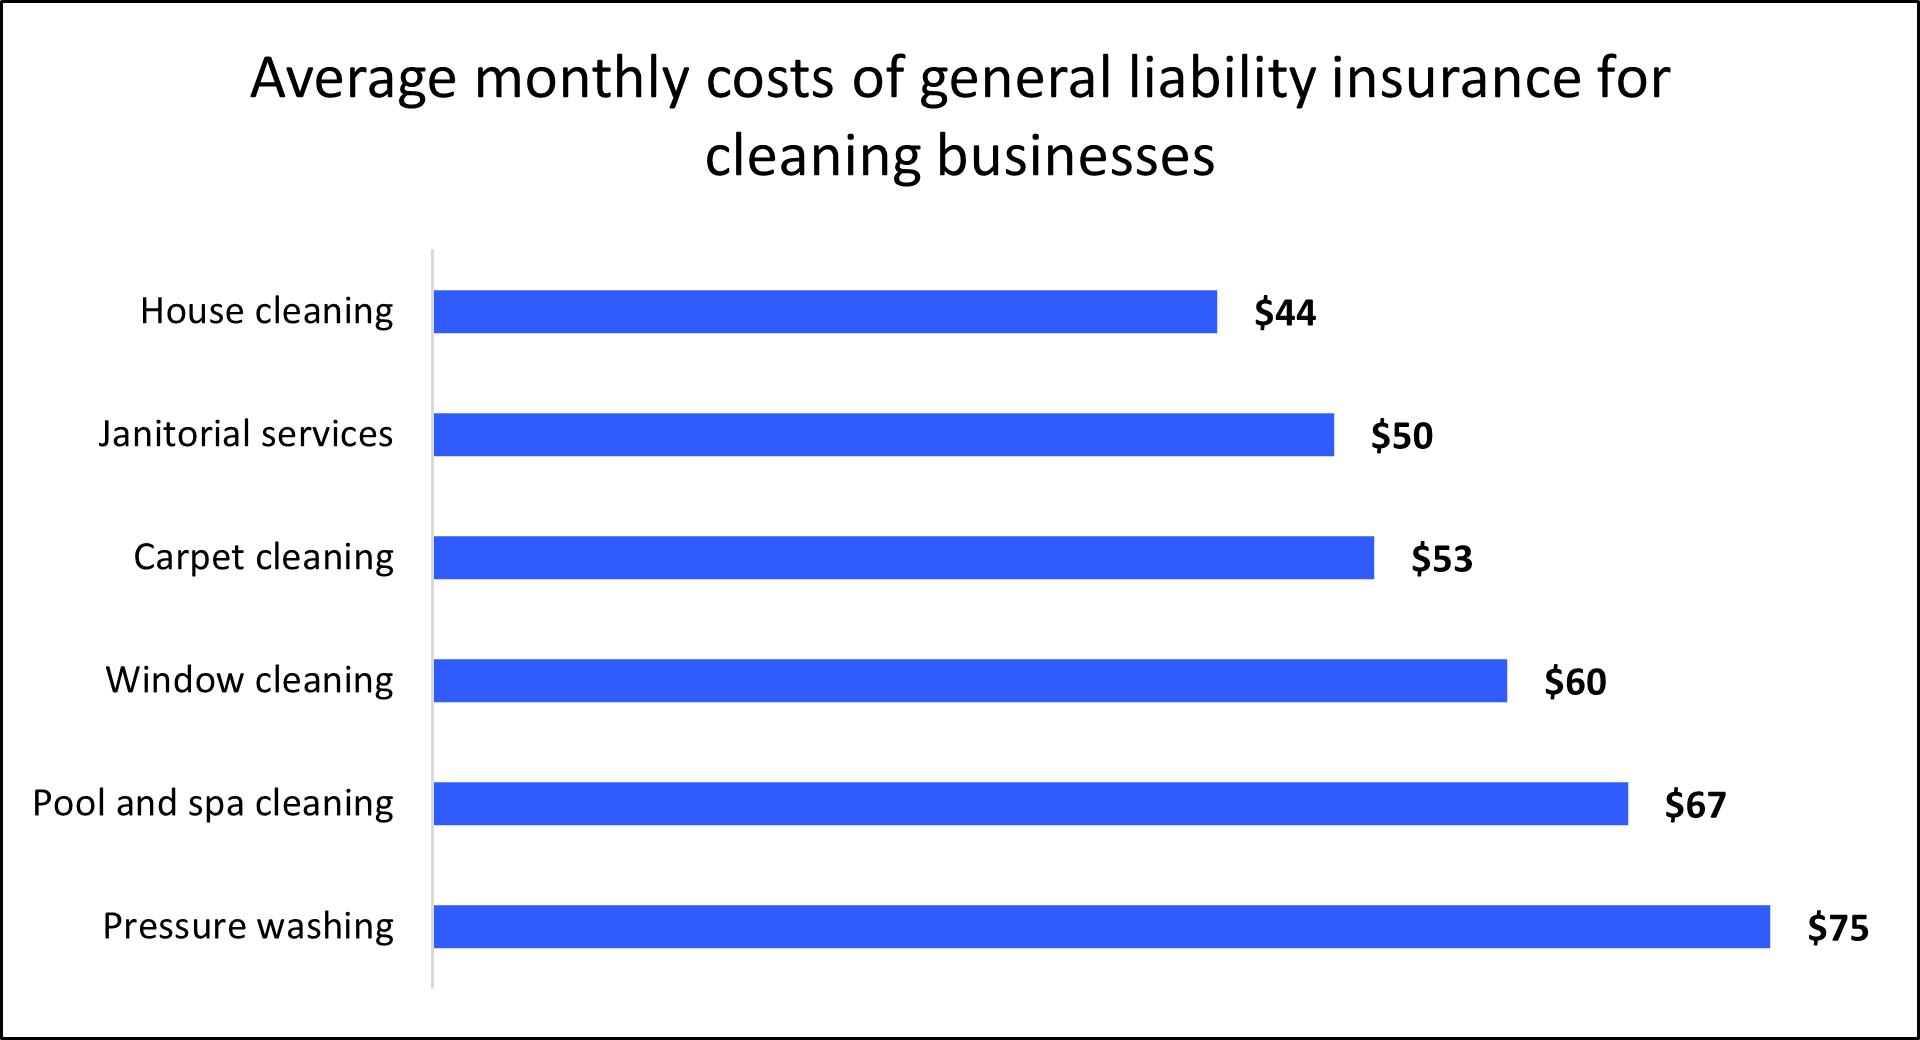 Average monthly cost of general liability insurance for cleaning businesses by profession.